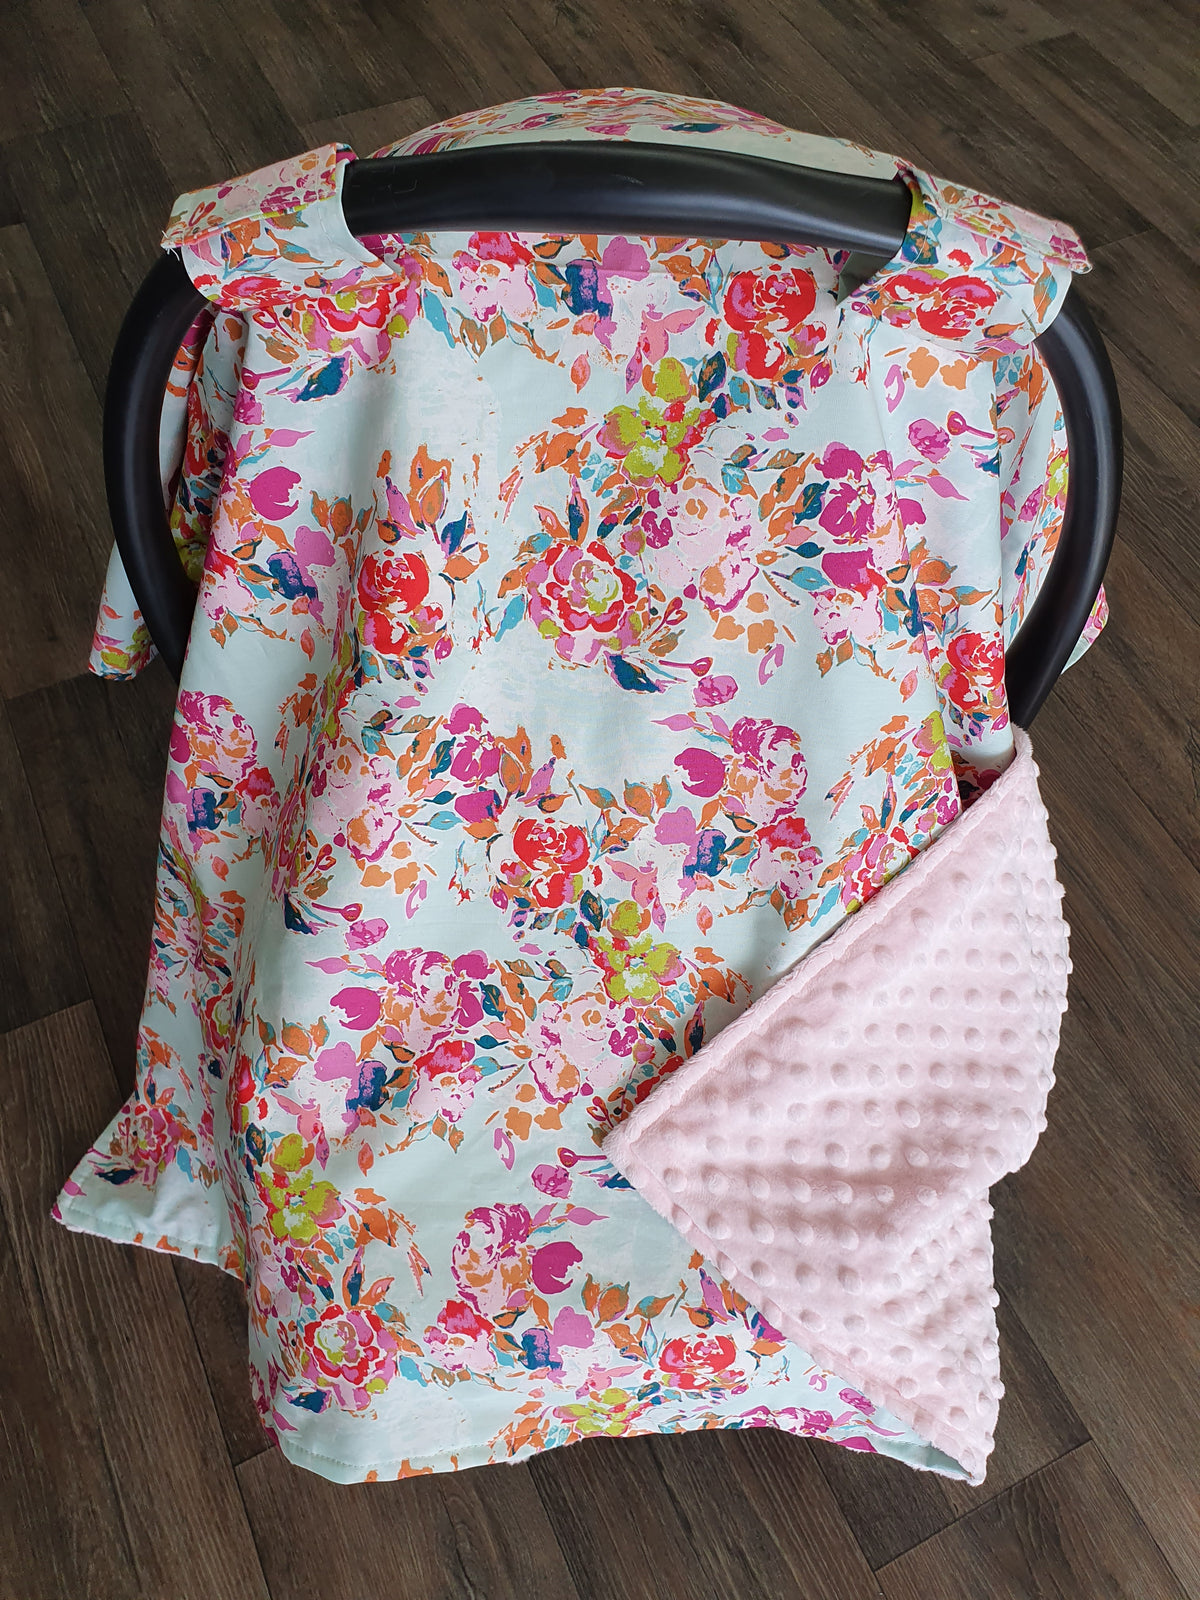 Girl Crib Bedding- Summer Floral and Cow Minky Ranch Baby Bedding Collection - DBC Baby Bedding Co 